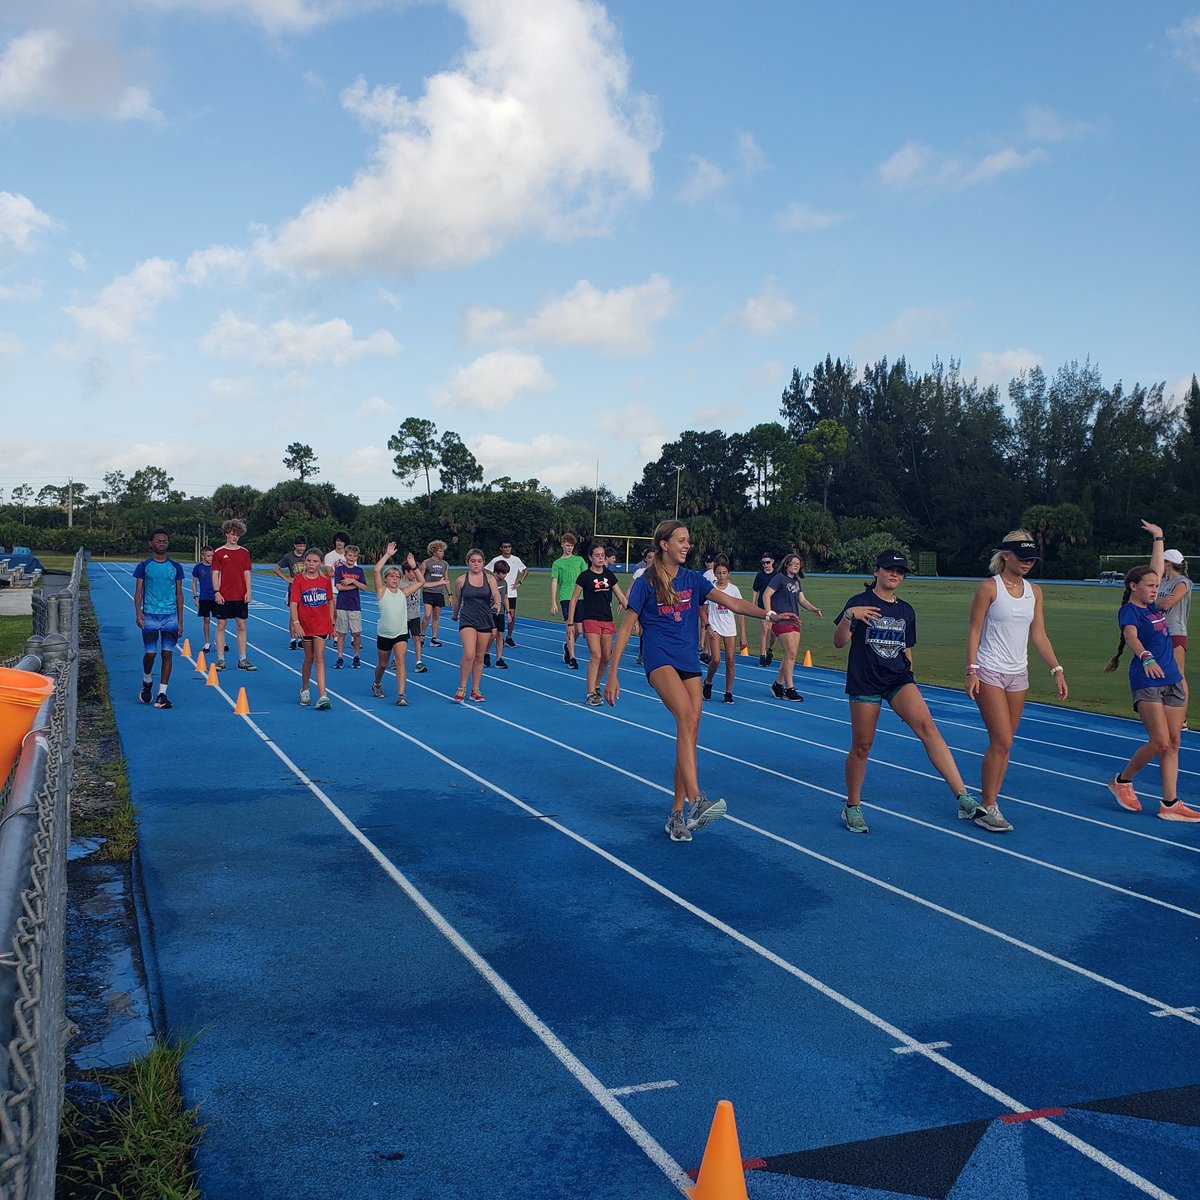 1st day of official practice. Dynamics, medium run & hill work for some & 300 circuits for others! In the book! #TKALions #TKALionsXC #TKALionstrack #wjmxccoach #flrunners #flmilesplit